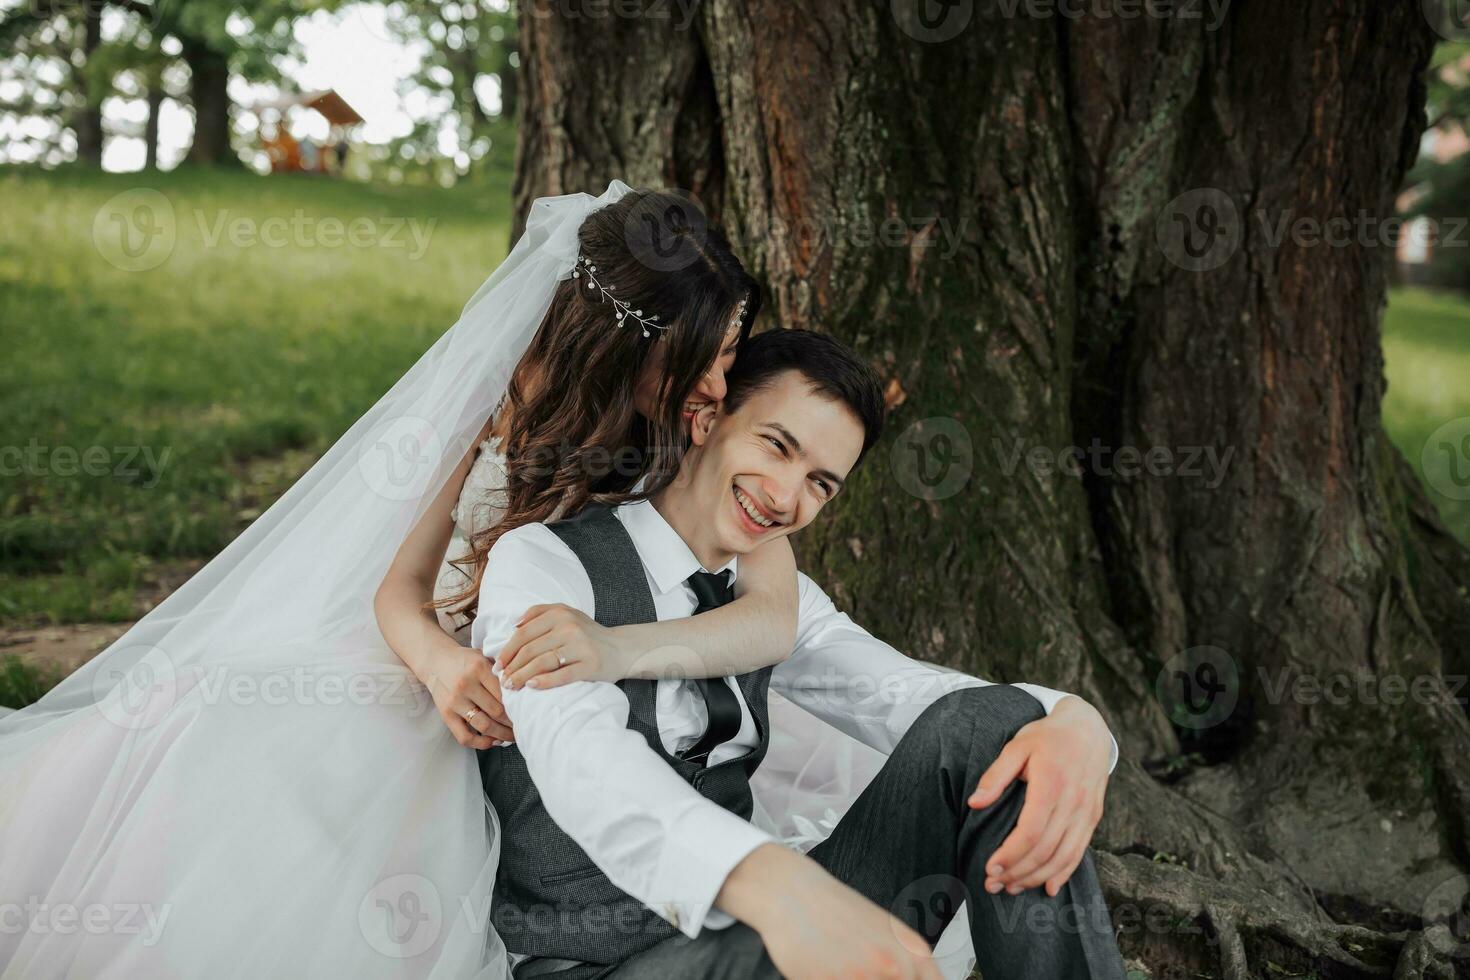 A beautiful bride with long curly hair in a chic dress hugs the groom, smiles, looking into the lens under a big tree. Portrait of the bride and groom. Spring wedding. Natural makeup photo